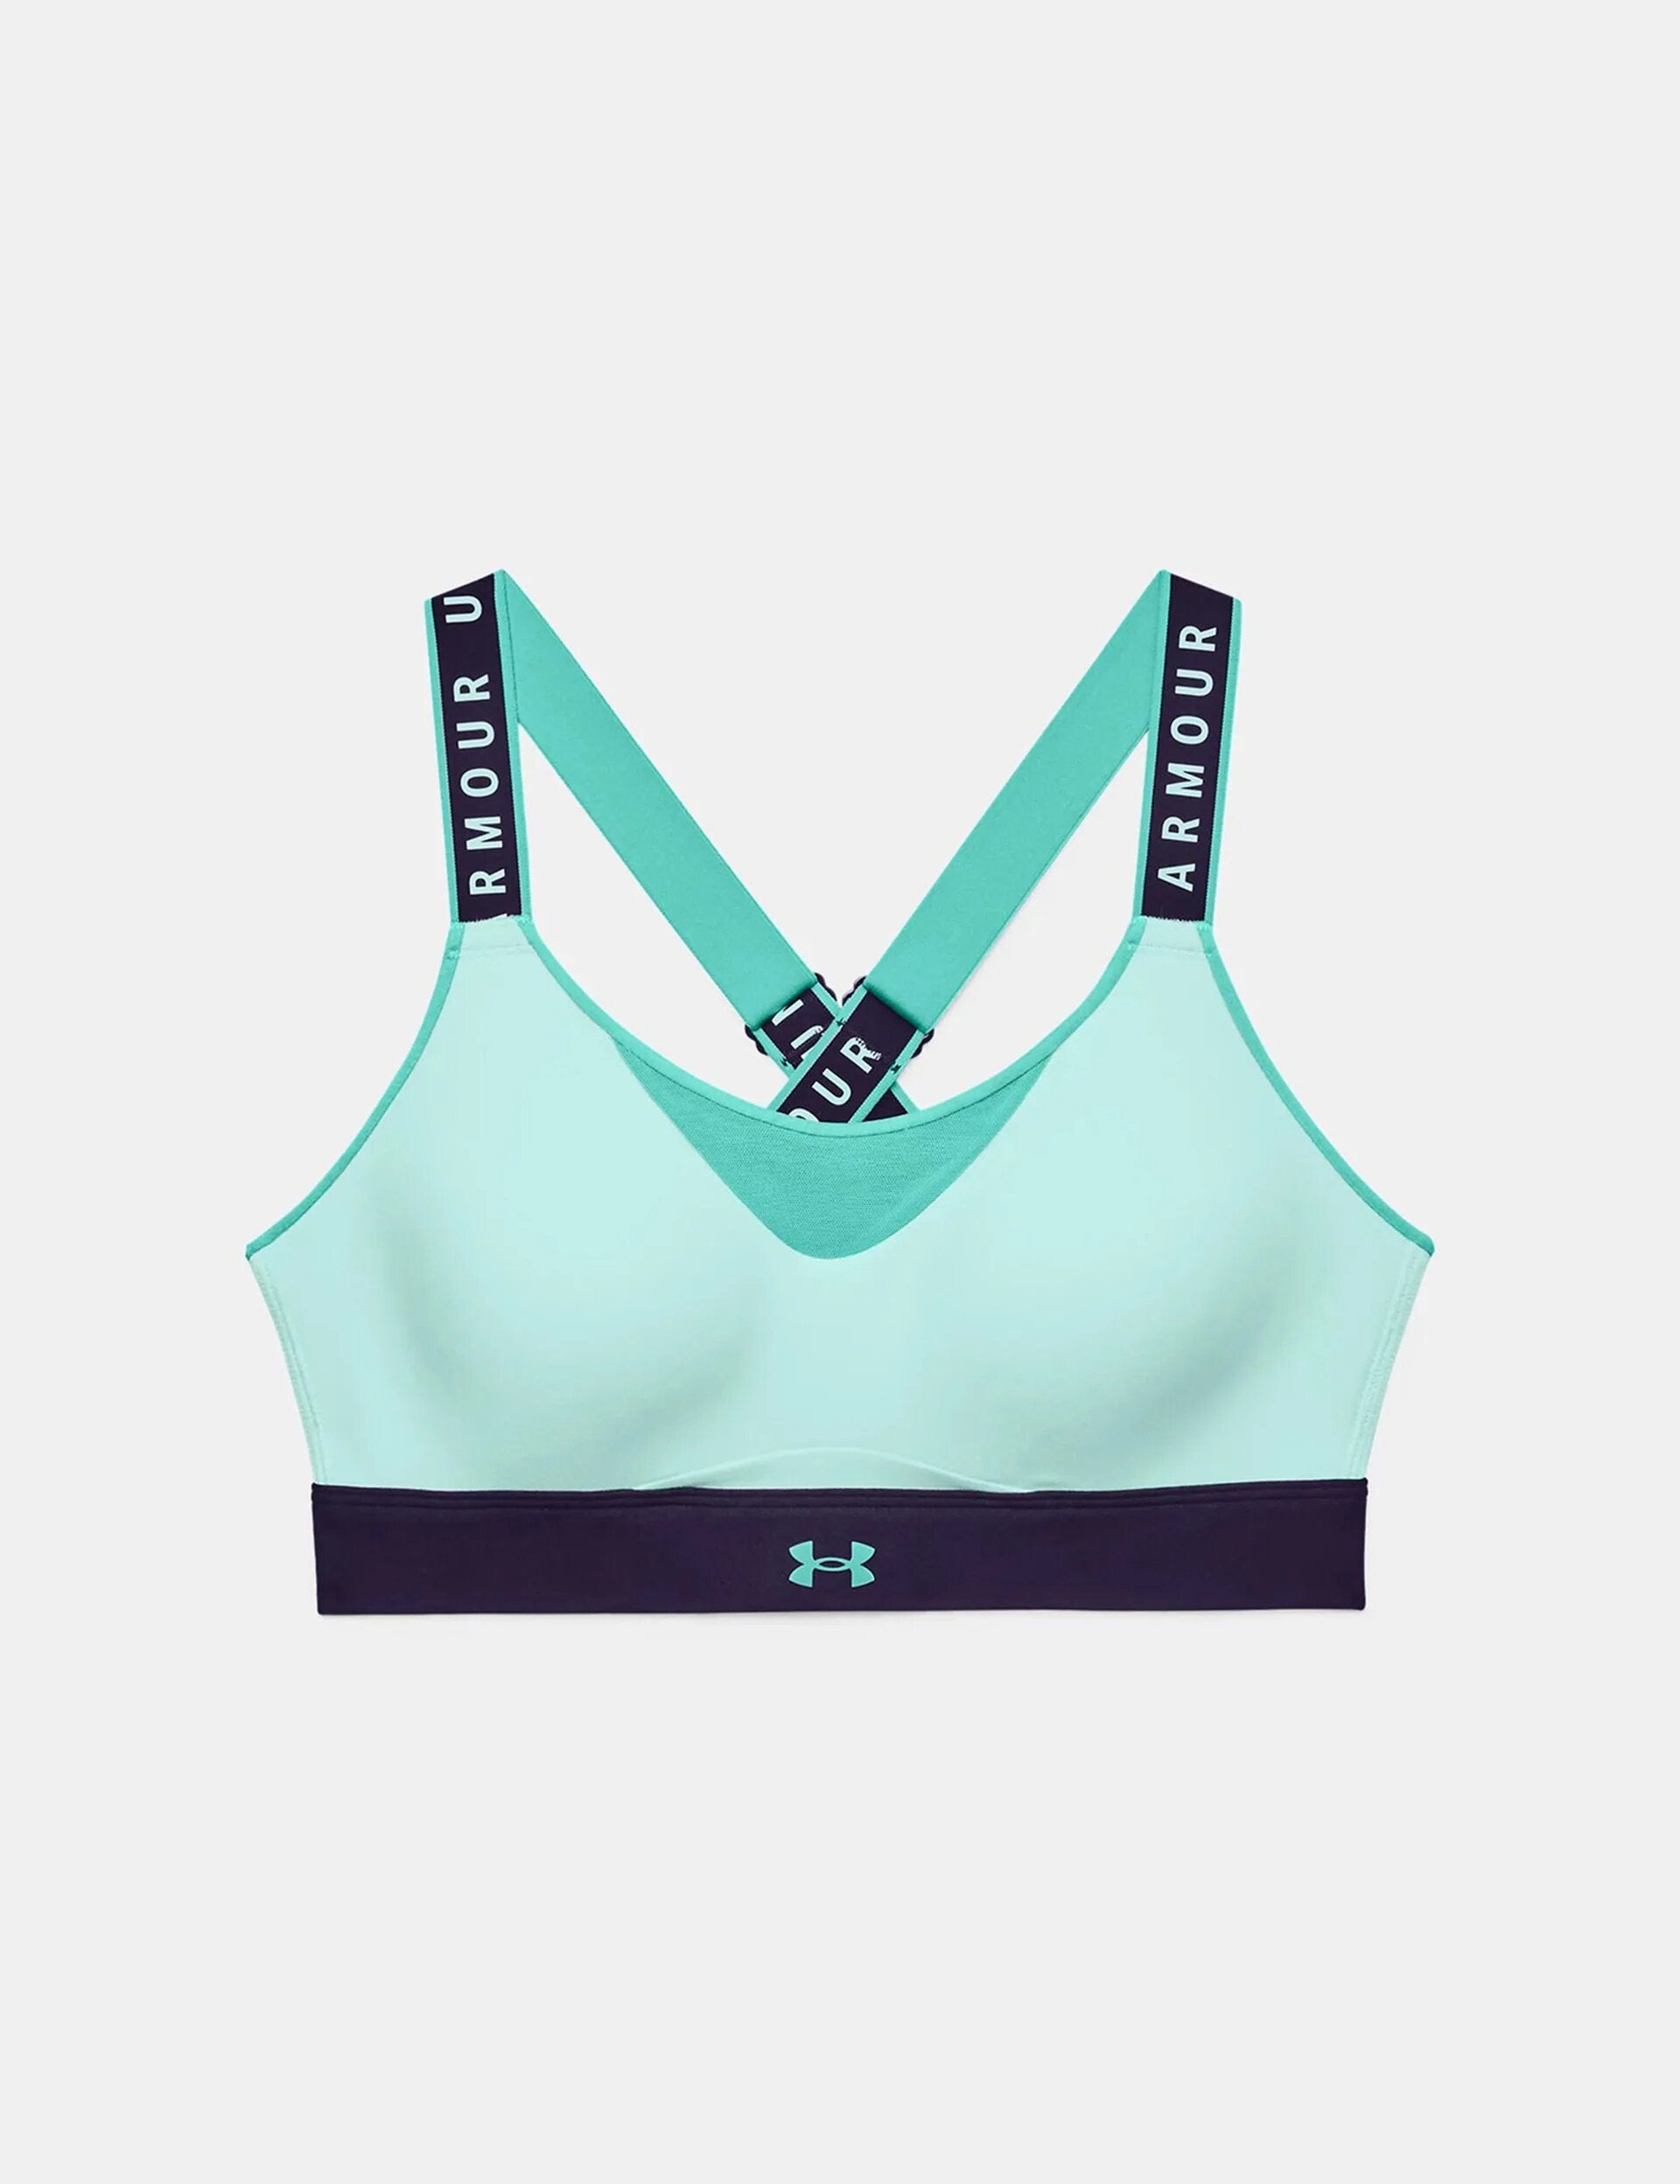 The Best High Impact Sports Bras As a woman who's run a marathon and who has D-cup boobs, I can tell you that running shoes are not exactly my first priority. For me, it’s all about the heavy-duty sports bra. I would rather run barefoot than in a flimsy brassiere. I would take a sock’s worth of blisters over the intolerable feeling of my boobs flopping around like an off-kilter windmill. And while running safely is always important (especially during heat waves), that feels impossible you're being hit in the face by your own body parts.